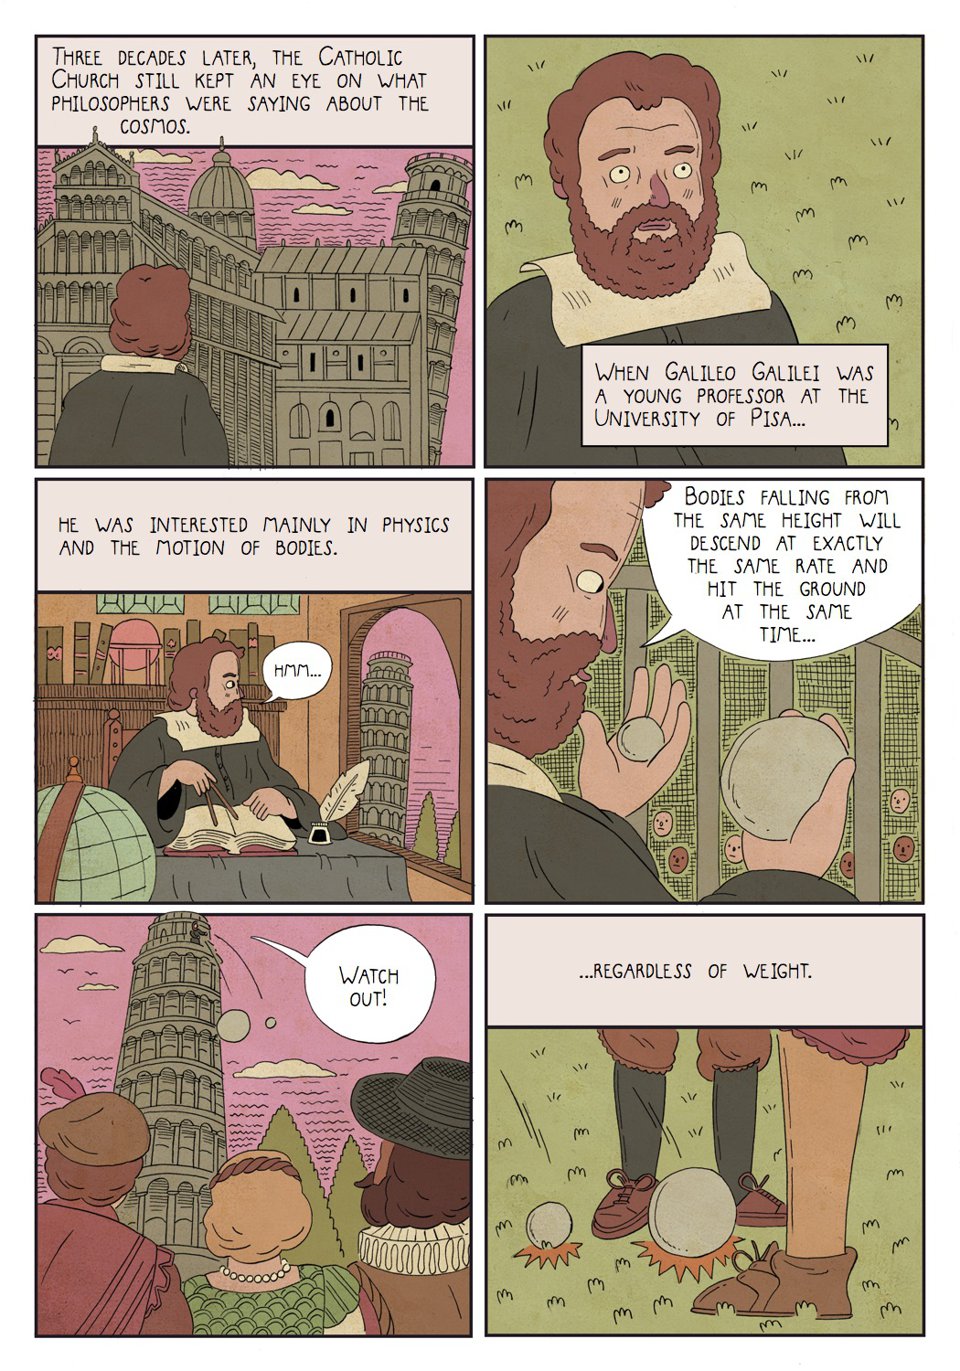 A page from the graphic philosophy novel, "Heretics!," by Steven and Ben Nadler